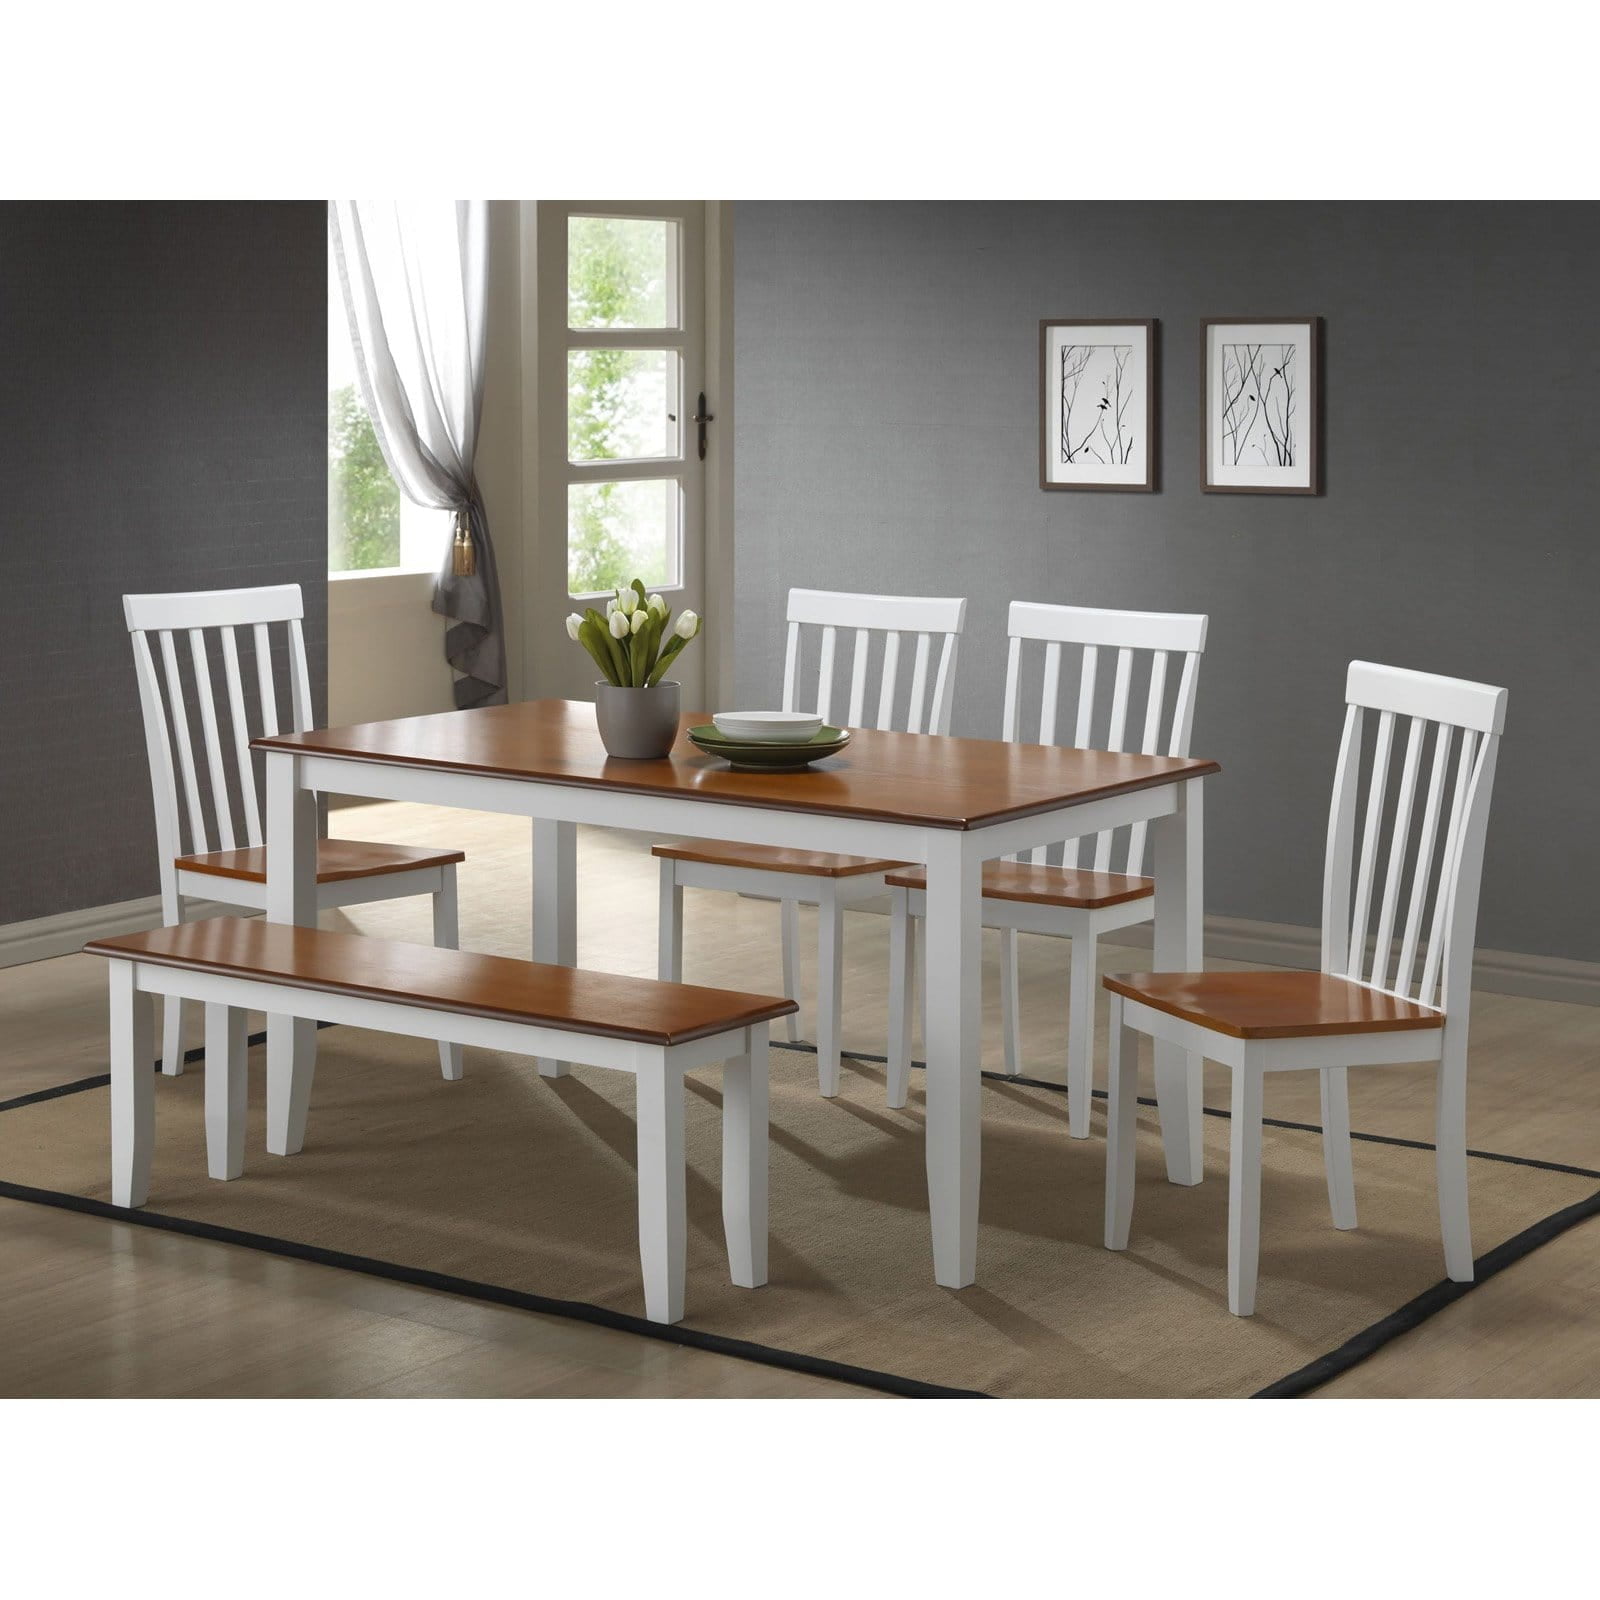 without chair eHemco Kids Solid Hard Wood Table in Honey Oak 